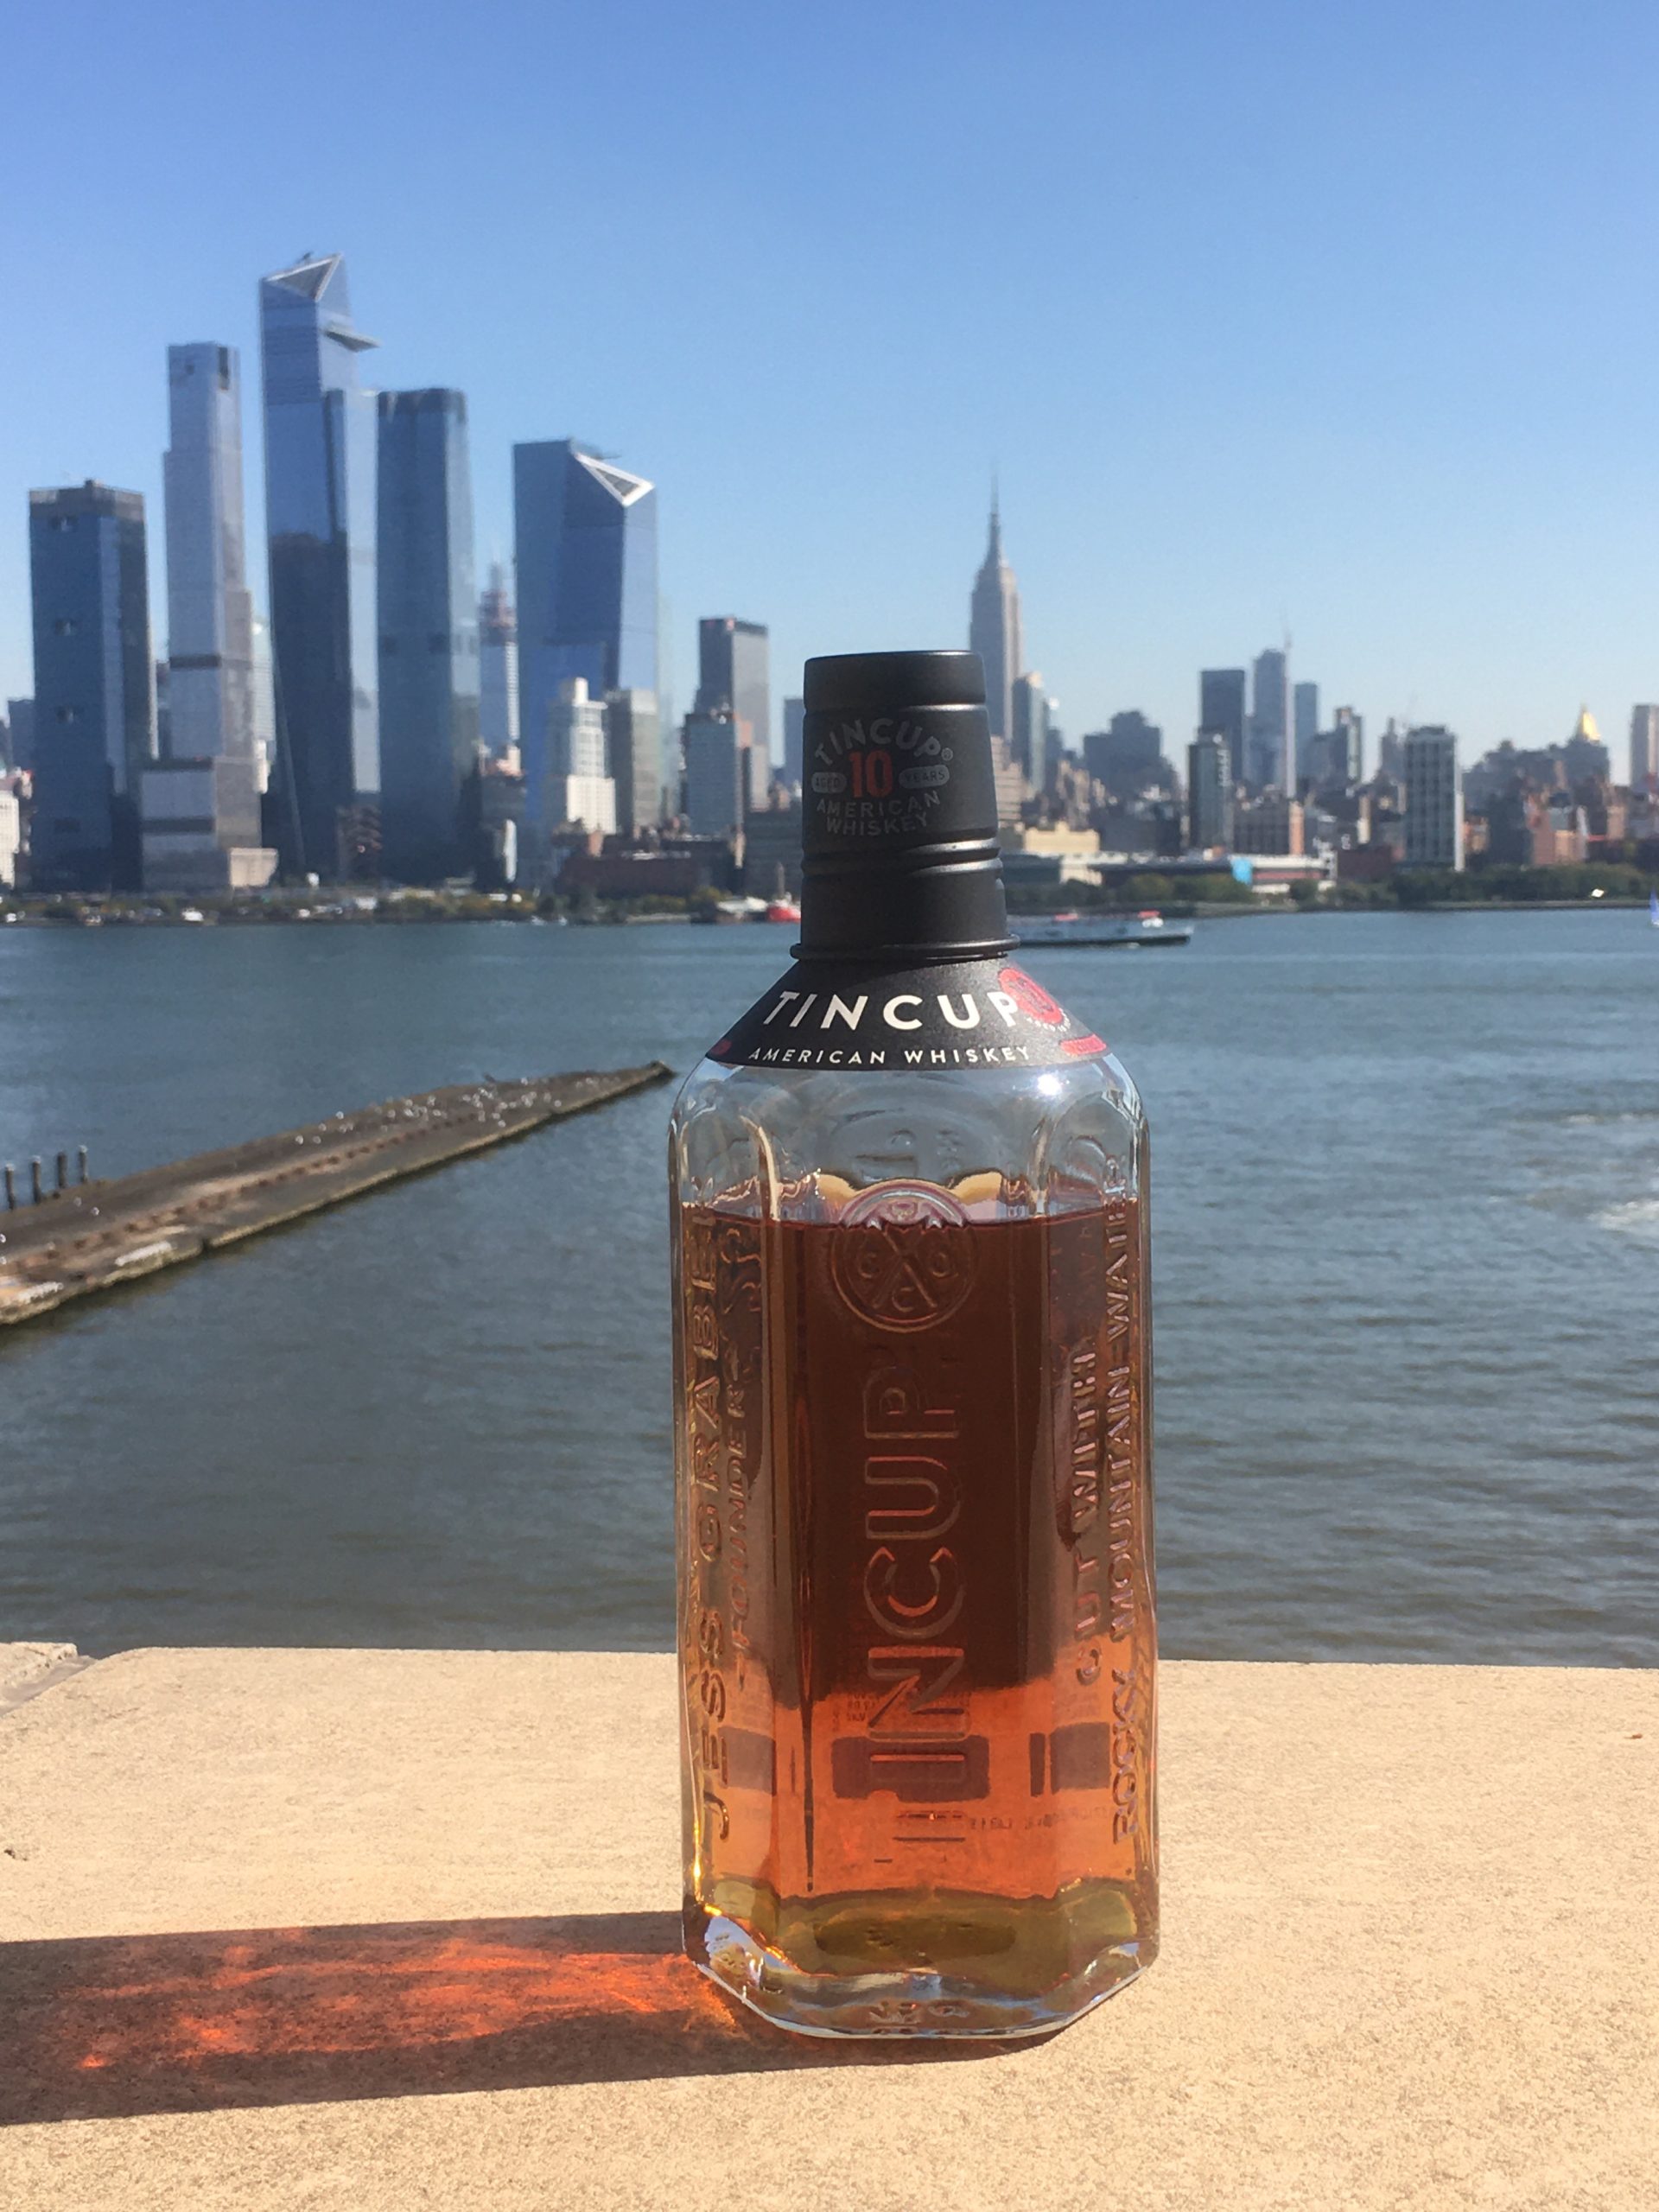 Tin Cup 10 Year American Whiskey